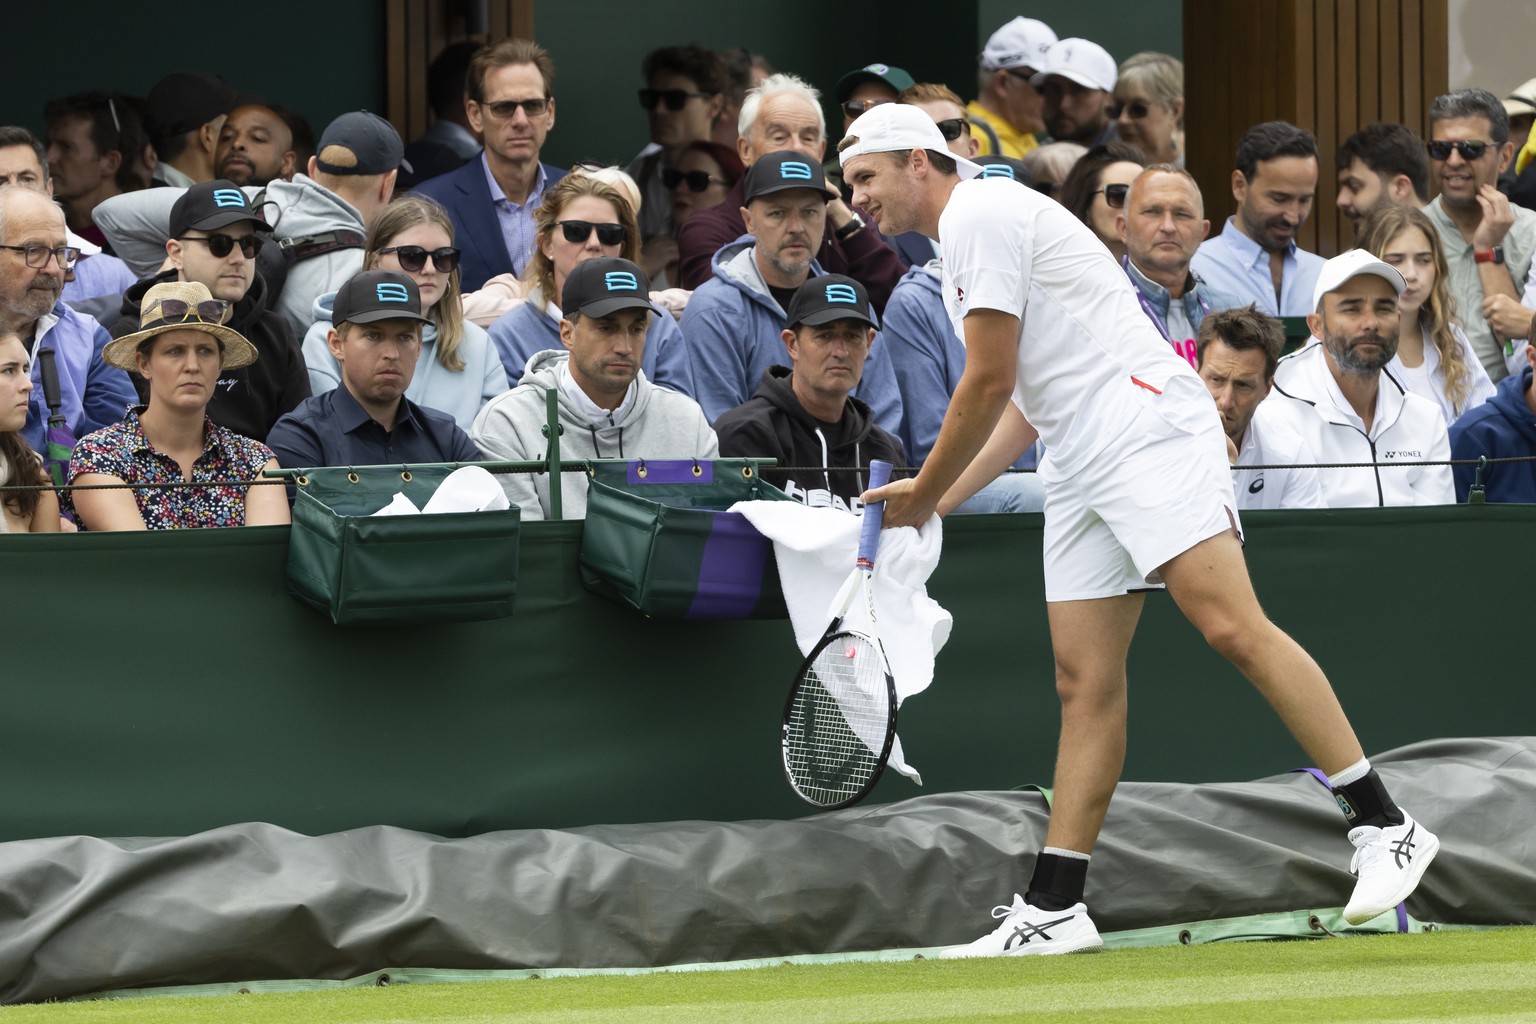 Dominic Stricker of Switzerland uses his towell beside his fans during his first round match against Alexei Popyrin of Australia at the All England Lawn Tennis Championships in Wimbledon, London, Wedn ...